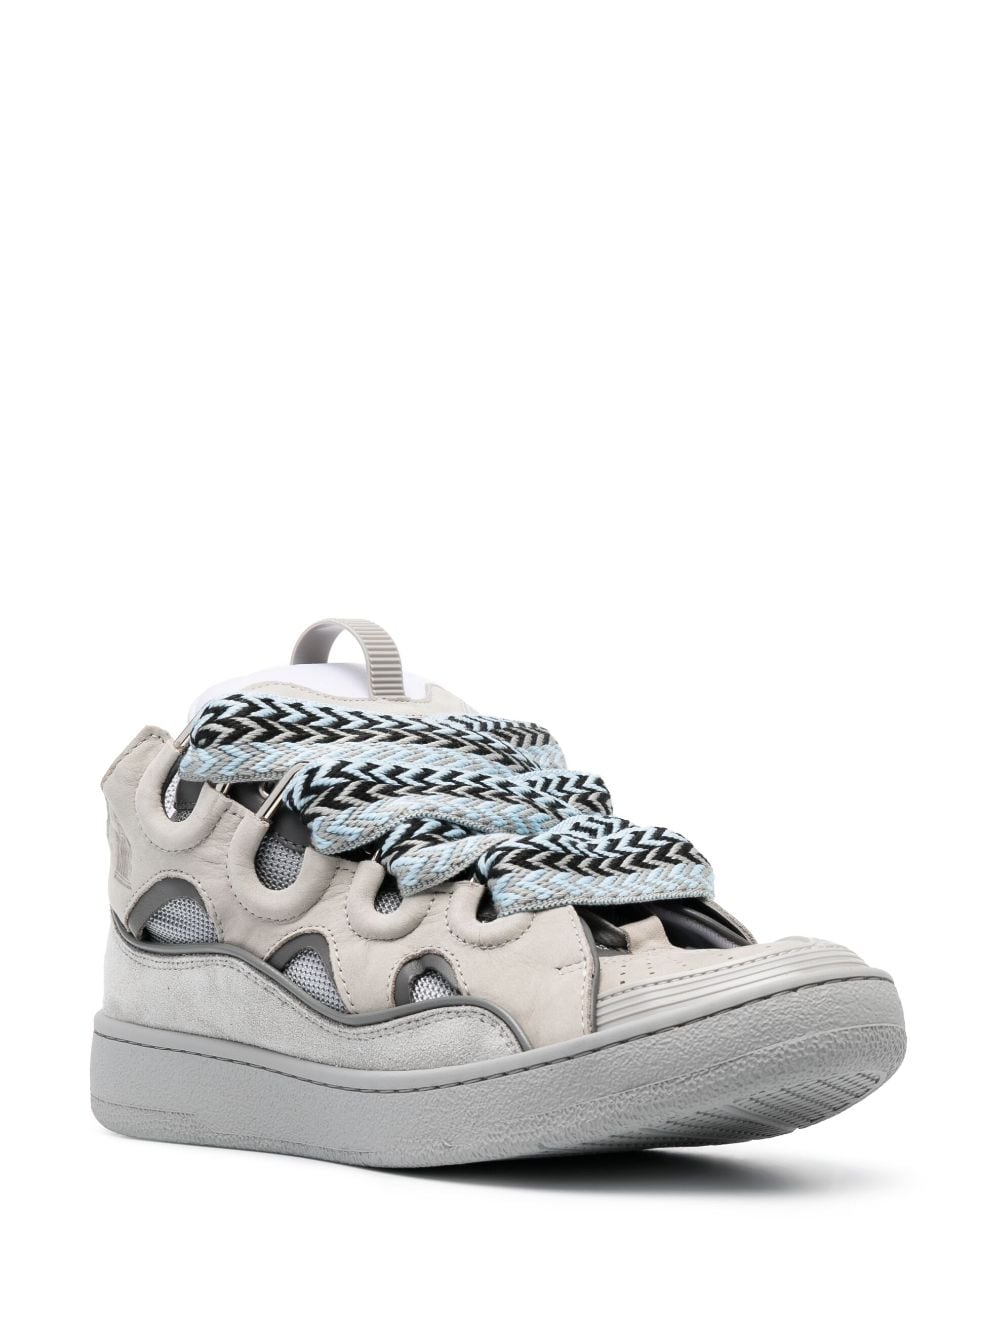 Lanvin Curb Chunky Leather Sneakers - Farfetch